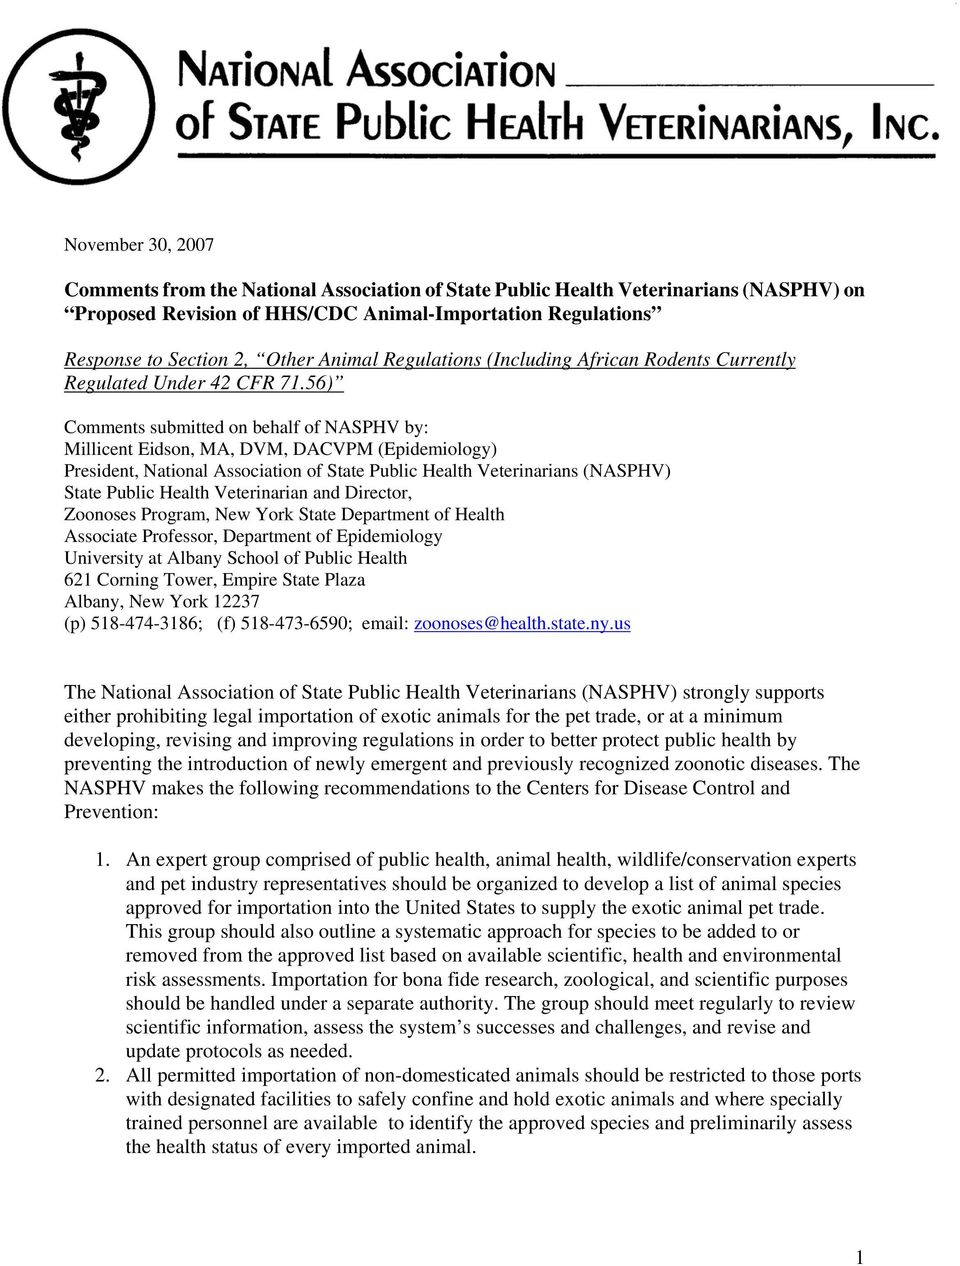 56) Comments submitted on behalf of NASPHV by: Millicent Eidson, MA, DVM, DACVPM (Epidemiology) President, National Association of State Public Health Veterinarians (NASPHV) State Public Health